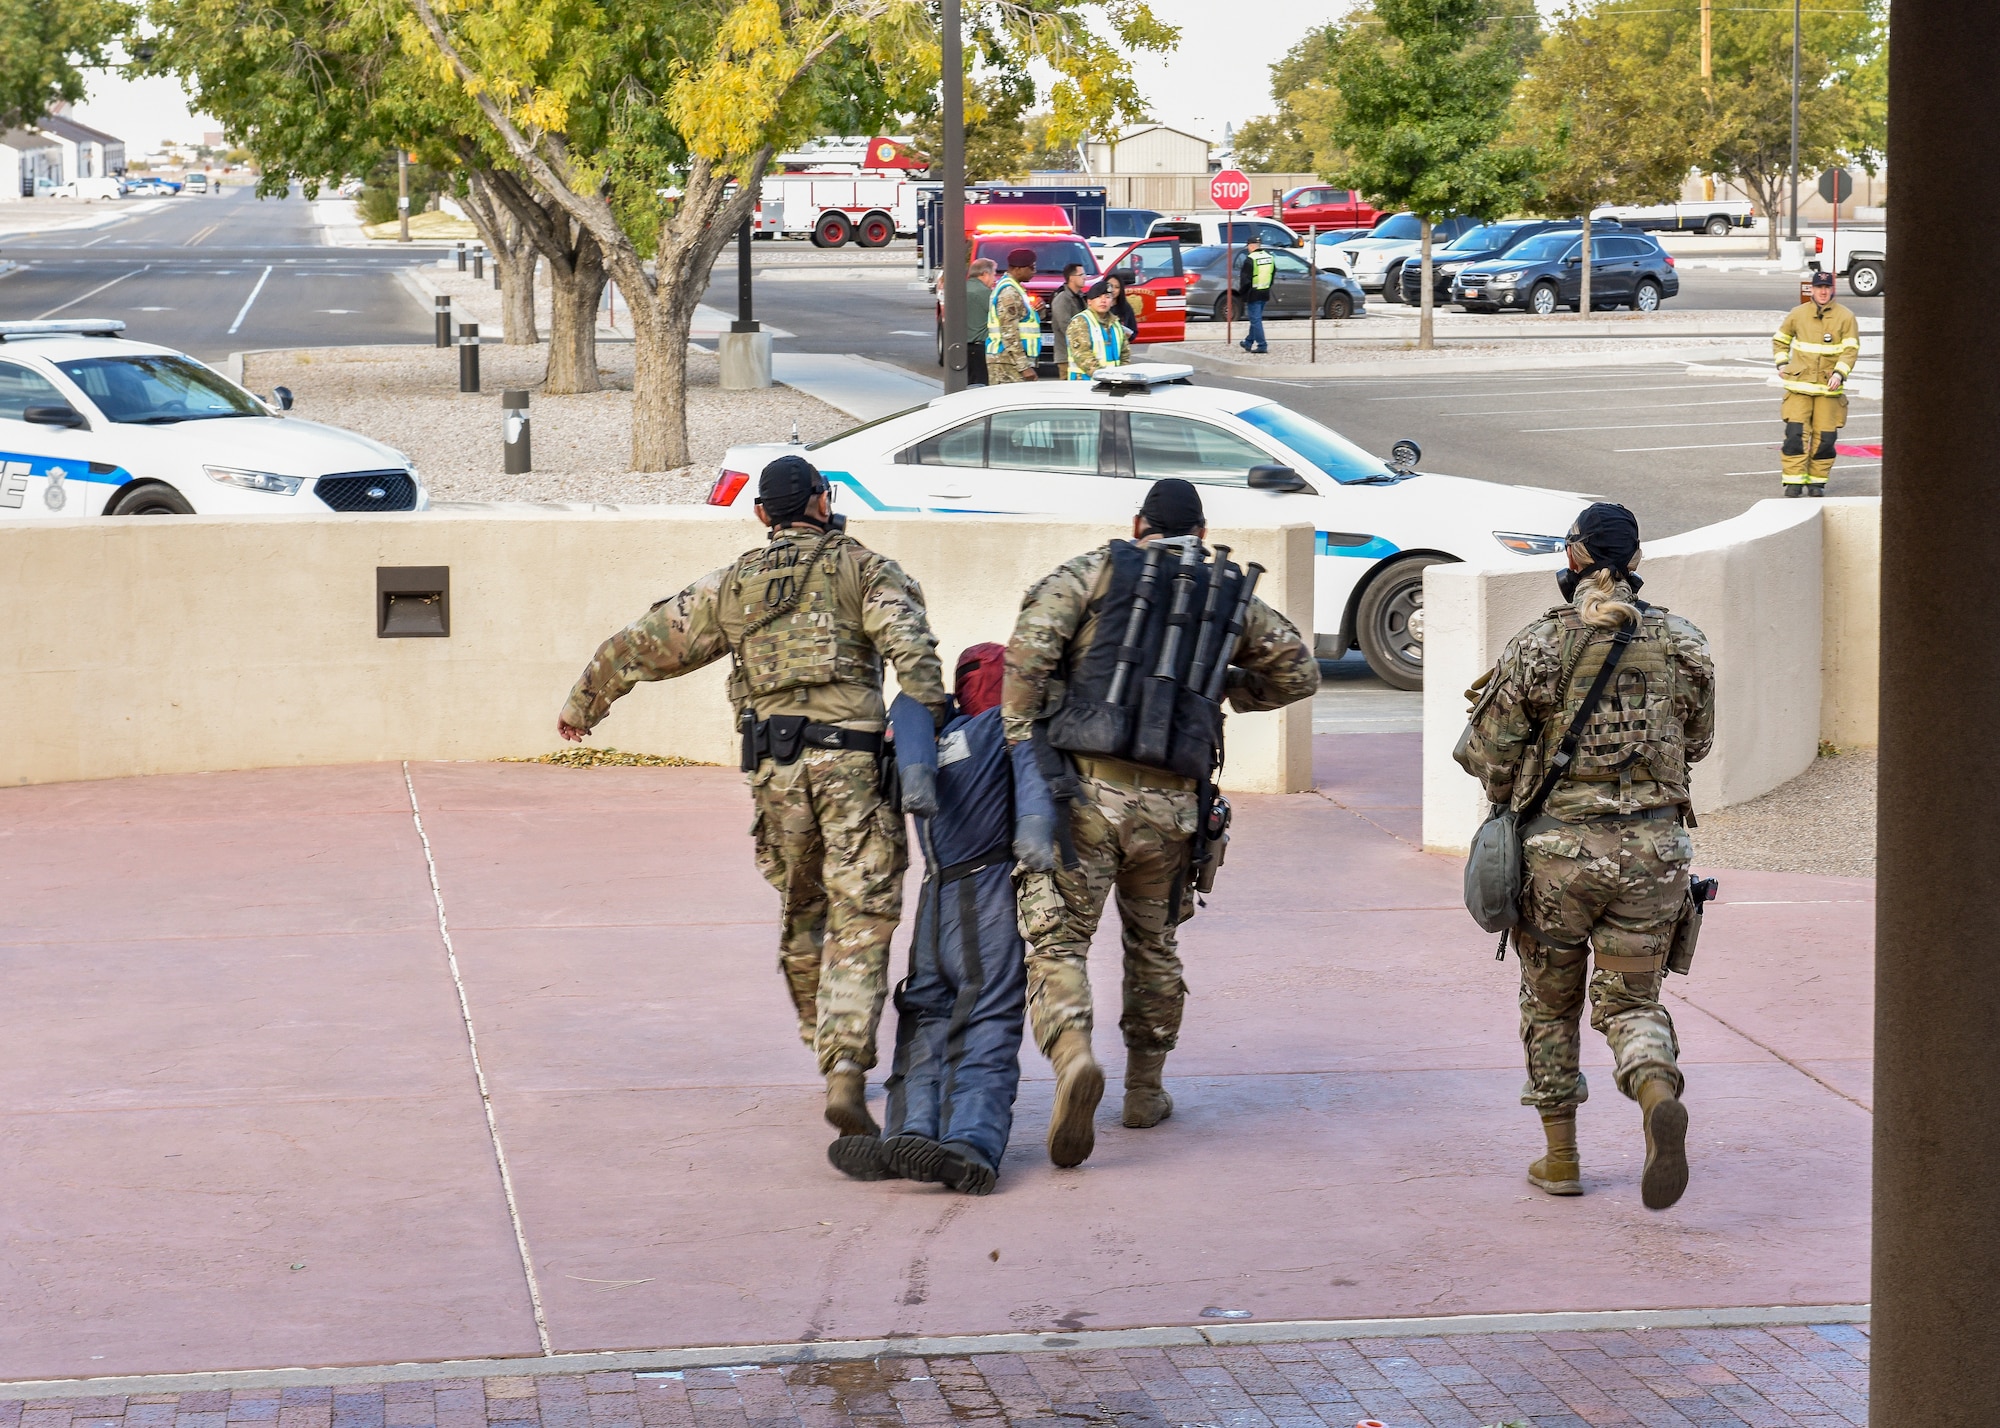 Team members from the 377th Security Forces Squadron Alpha Flight evacuate a simulated patient as part of a chemical, biological, radiological, nuclear and high–yield explosive emergency during exercise Global Thunder 20 at Kirtland Air Force Base, N.M., Oct. 24, 2019. Global Thunder is an annual U.S. Strategic Command exercise designed to provide training opportunities to test and validate command, control and operational procedures. (U.S. Air Force photo by Airman 1st Class Austin J. Prisbrey)